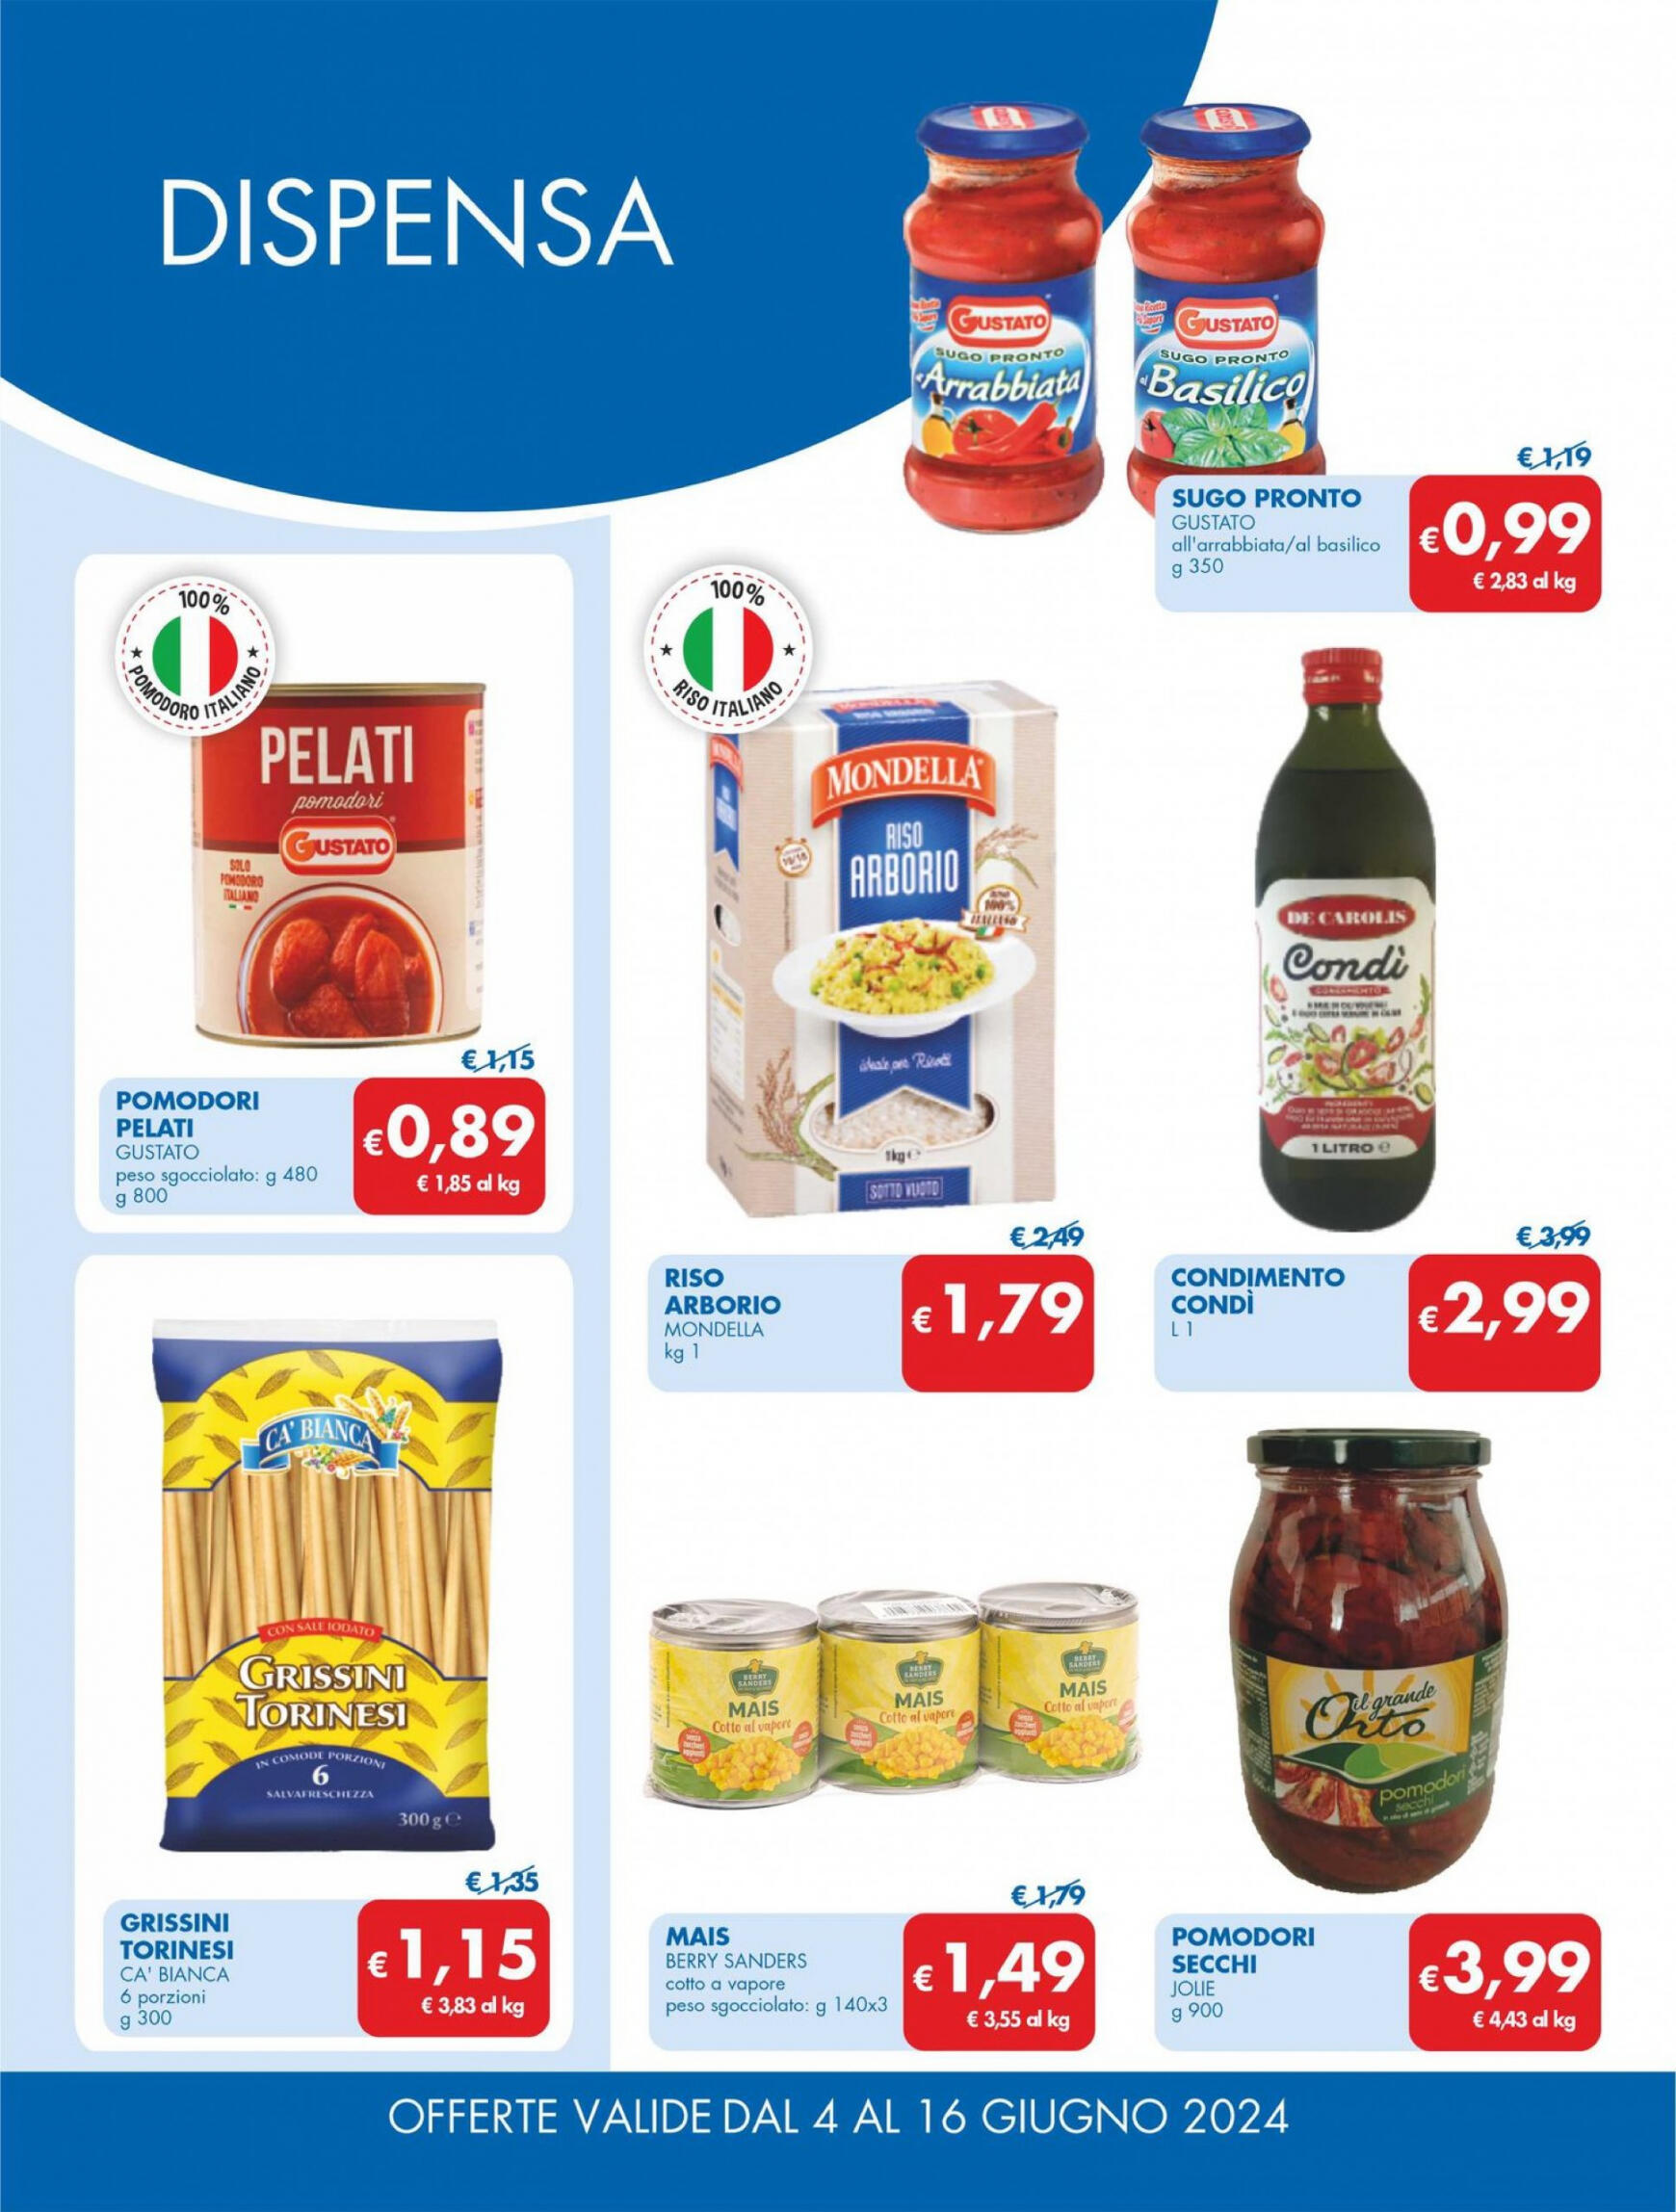 md-discount - Nuovo volantino MD 04.06. - 16.06. - page: 17